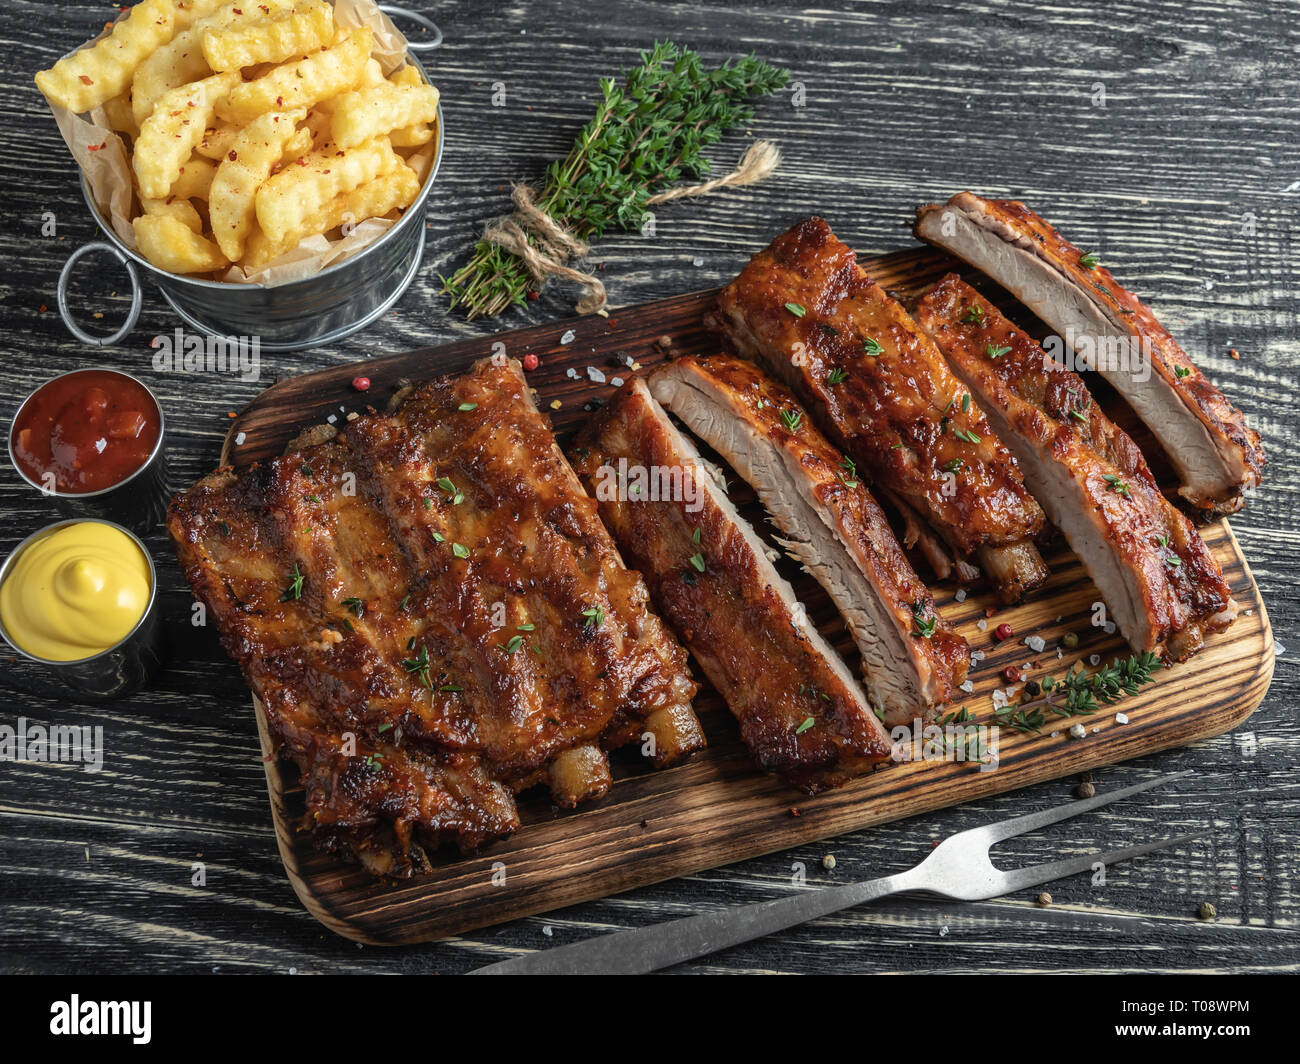 cutting grilled pork ribs with sauce on a board, french fries, spices, wooden background Stock Photo